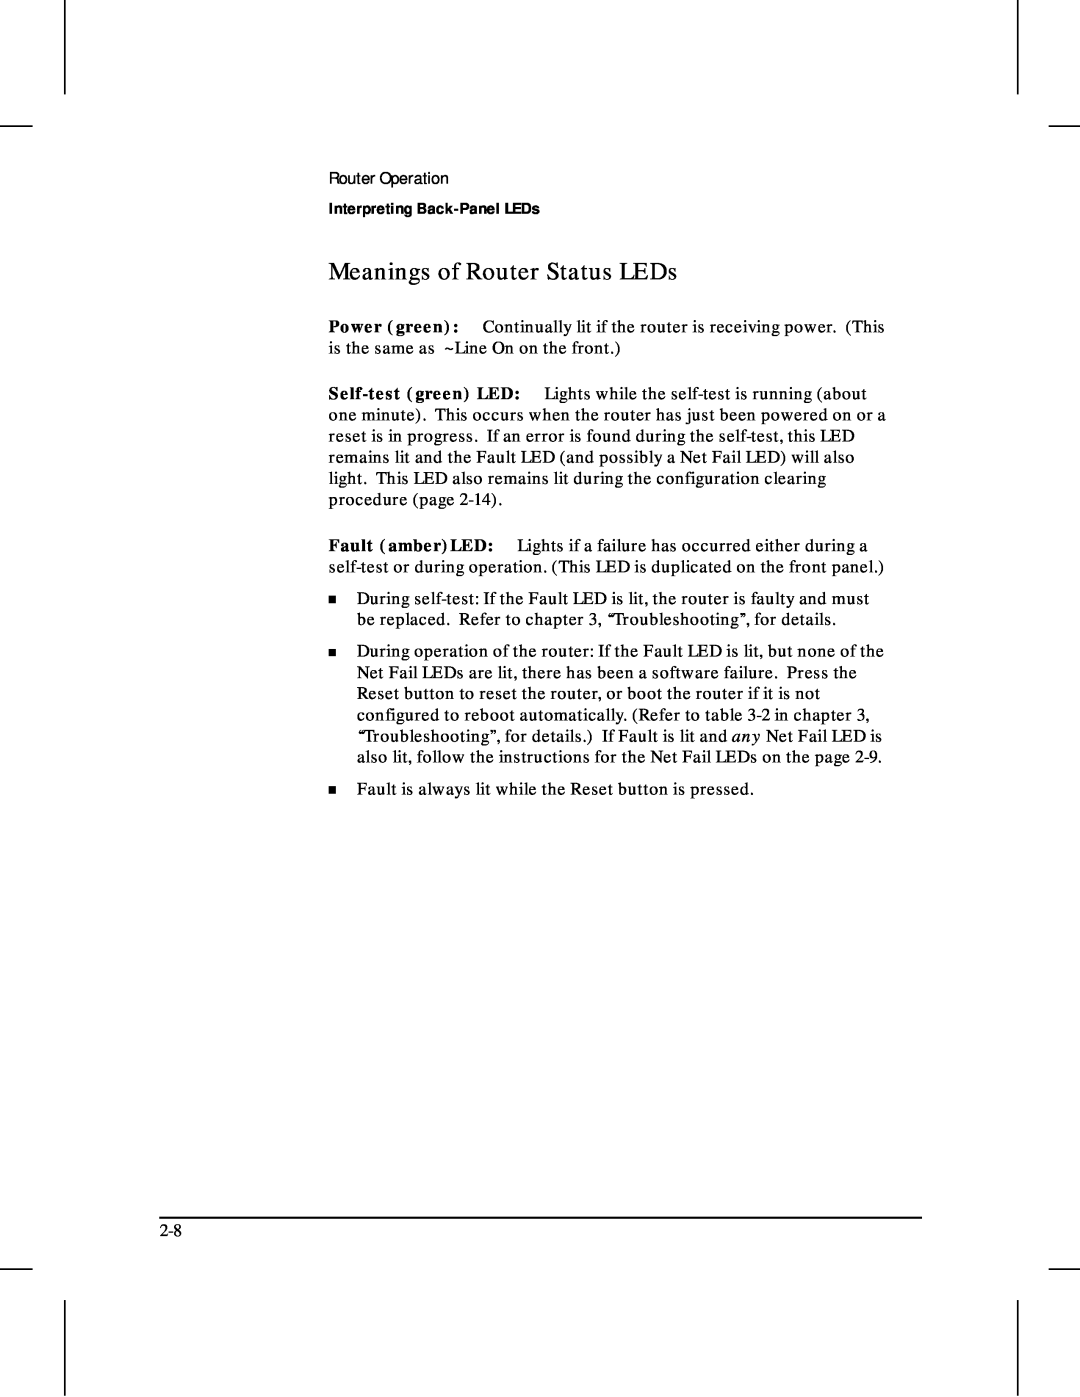 HP 480 manual Meanings of Router Status LEDs, Interpreting Back-Panel LEDs 